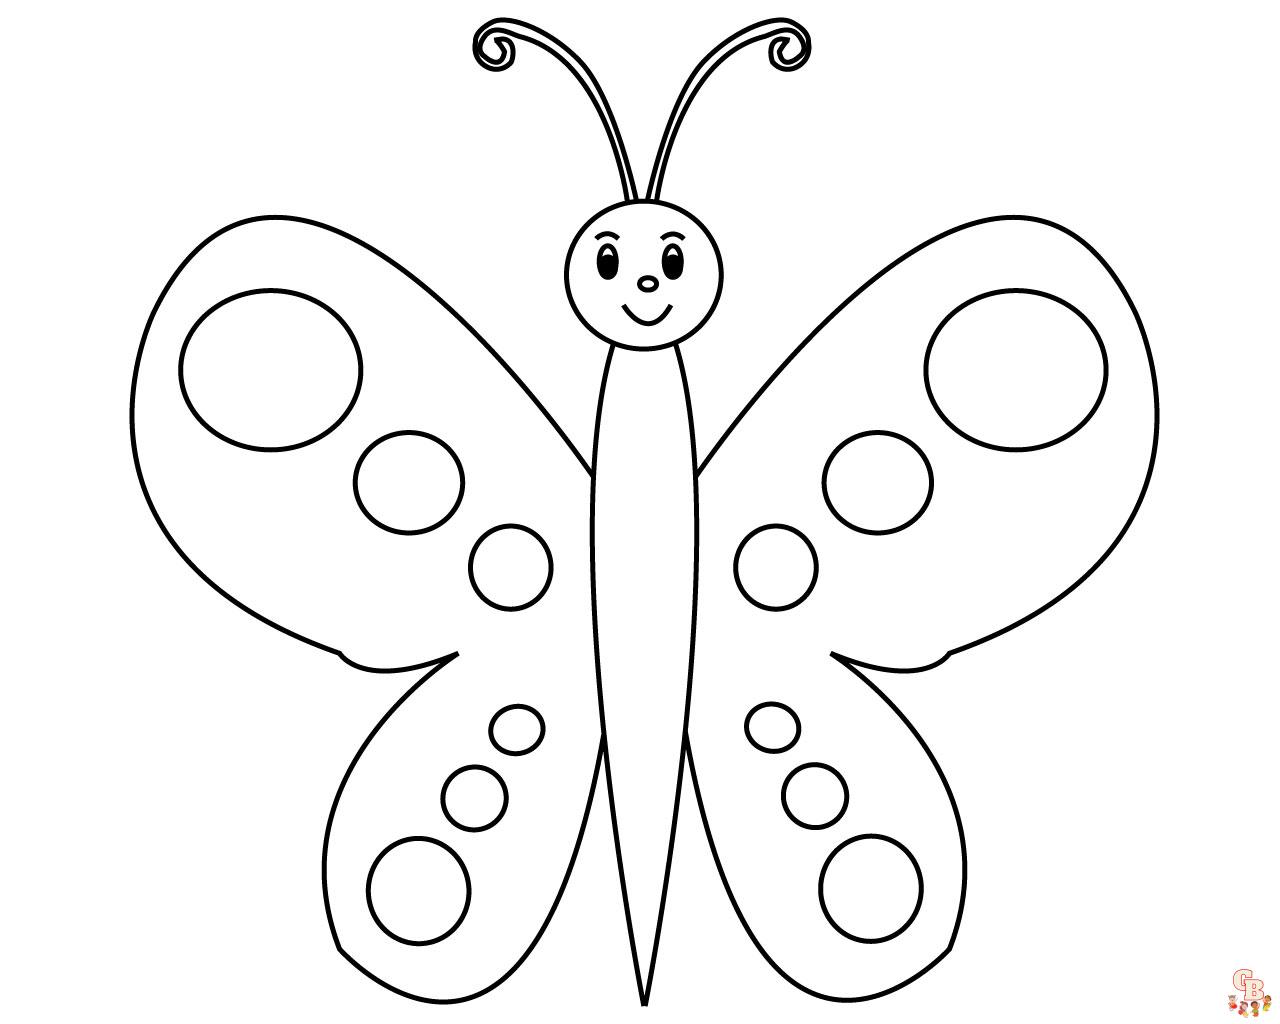 flutter-into-fun-with-preschool-butterfly-coloring-pages